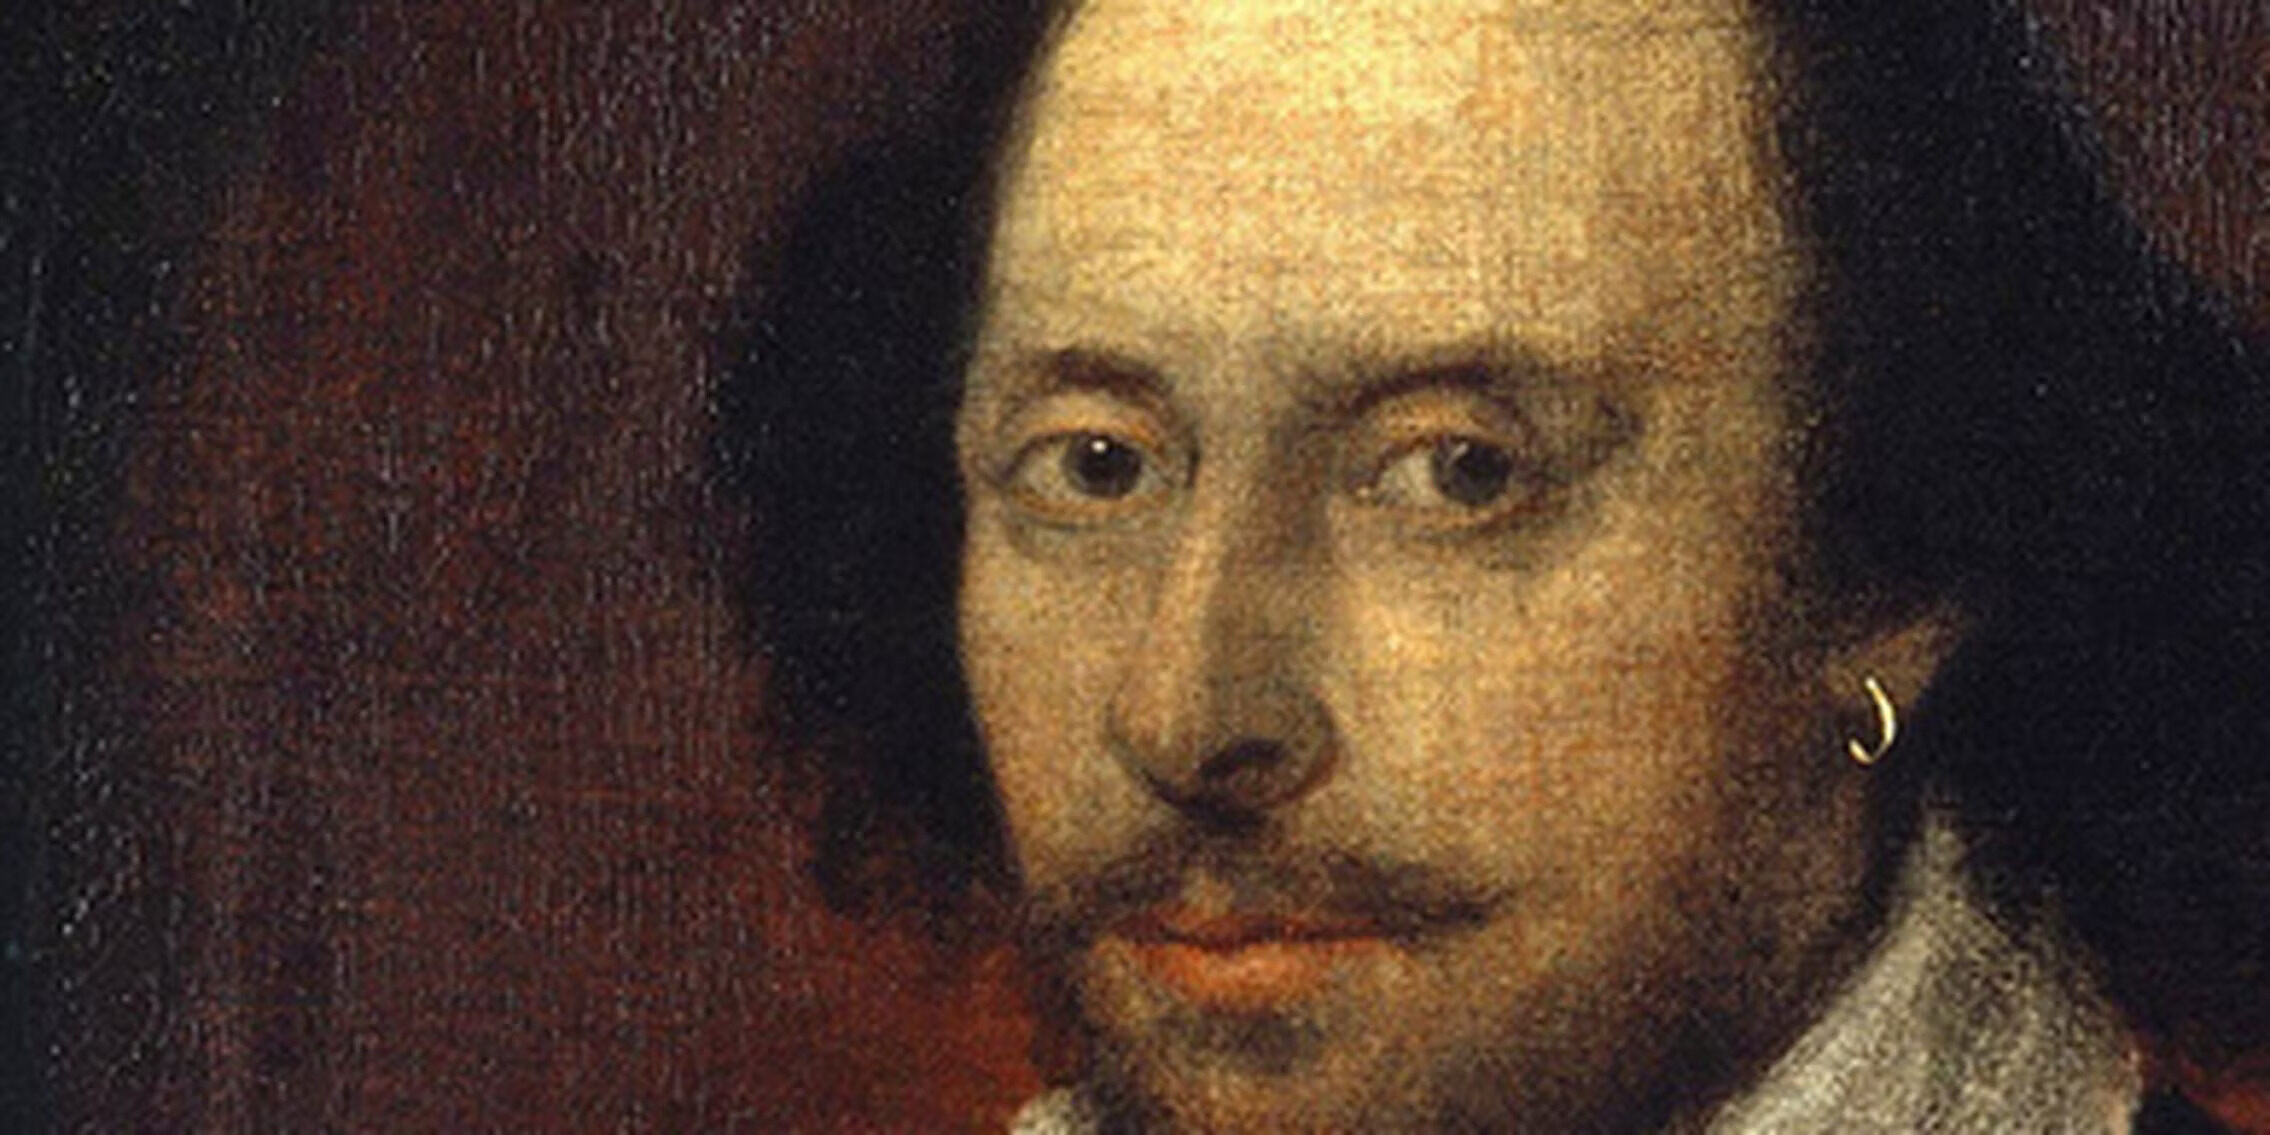 man-gets-revenge-on-web-scammer-by-texting-entire-works-of-shakespeare